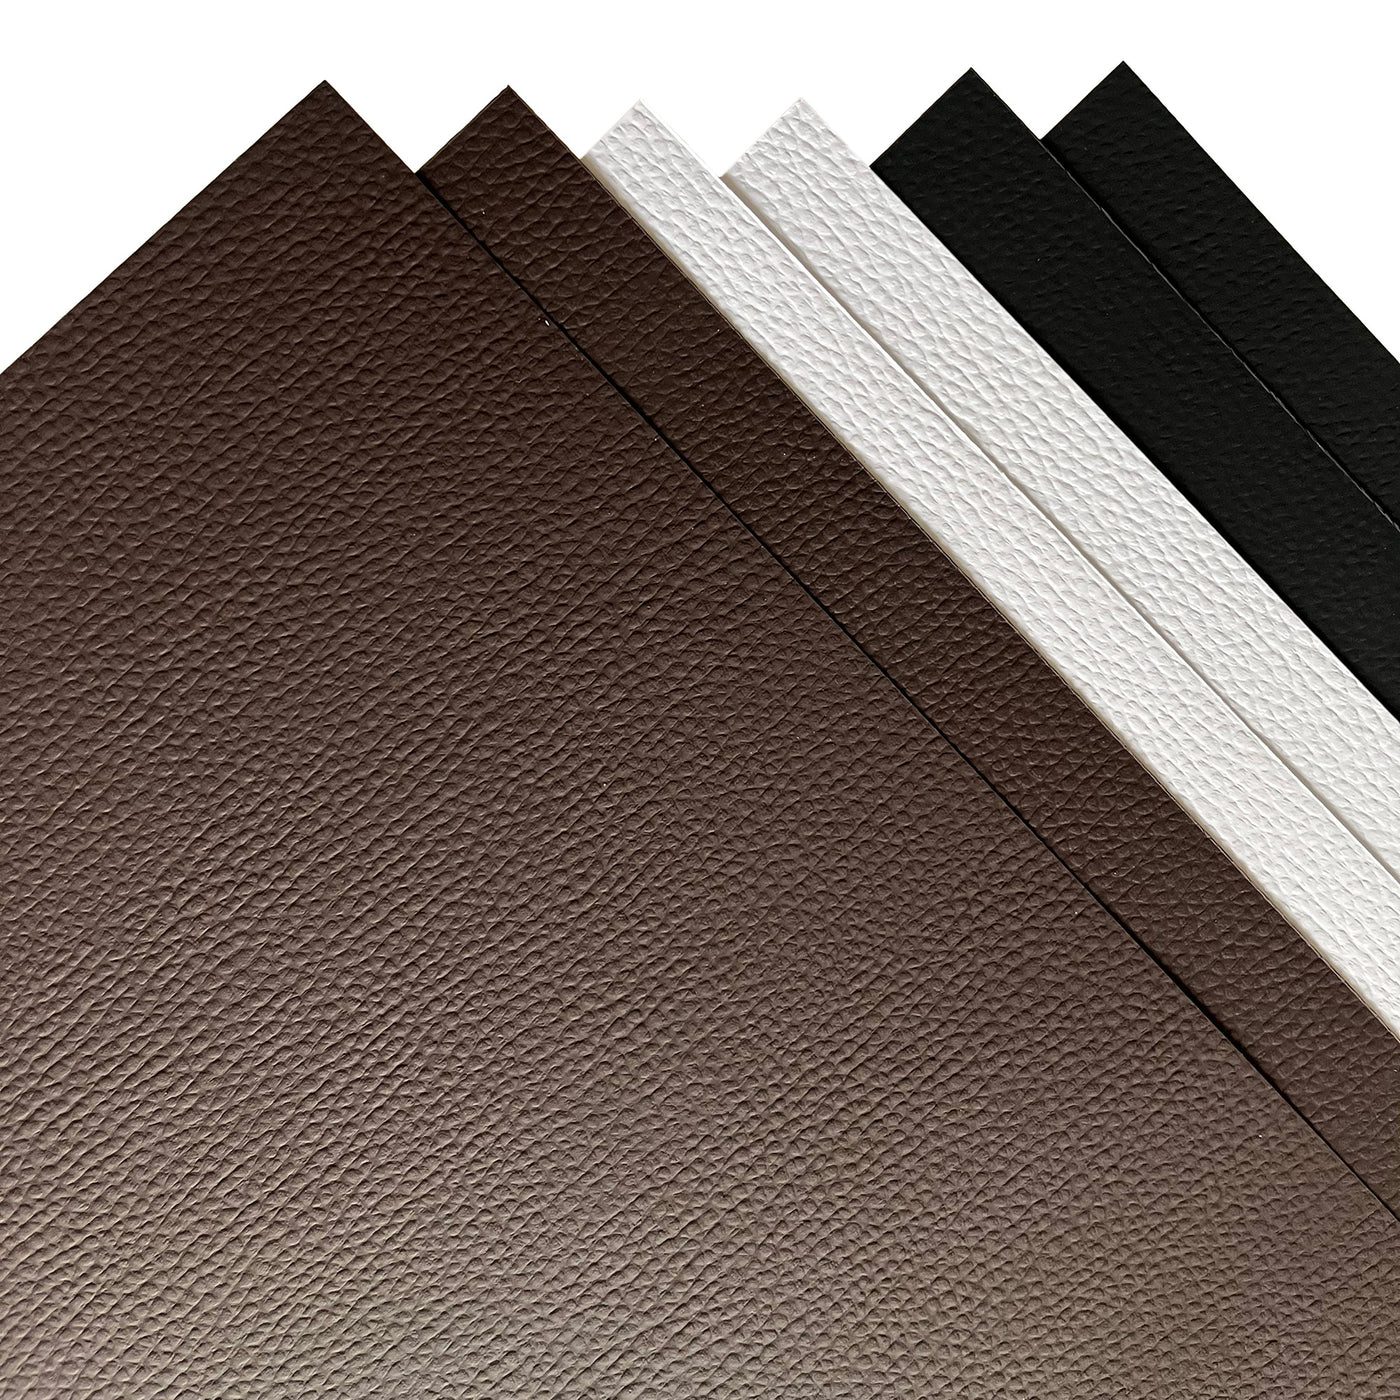 Leatherlike 12x12 Faux Leather Cardstock Variety Pack- 6 Sheets